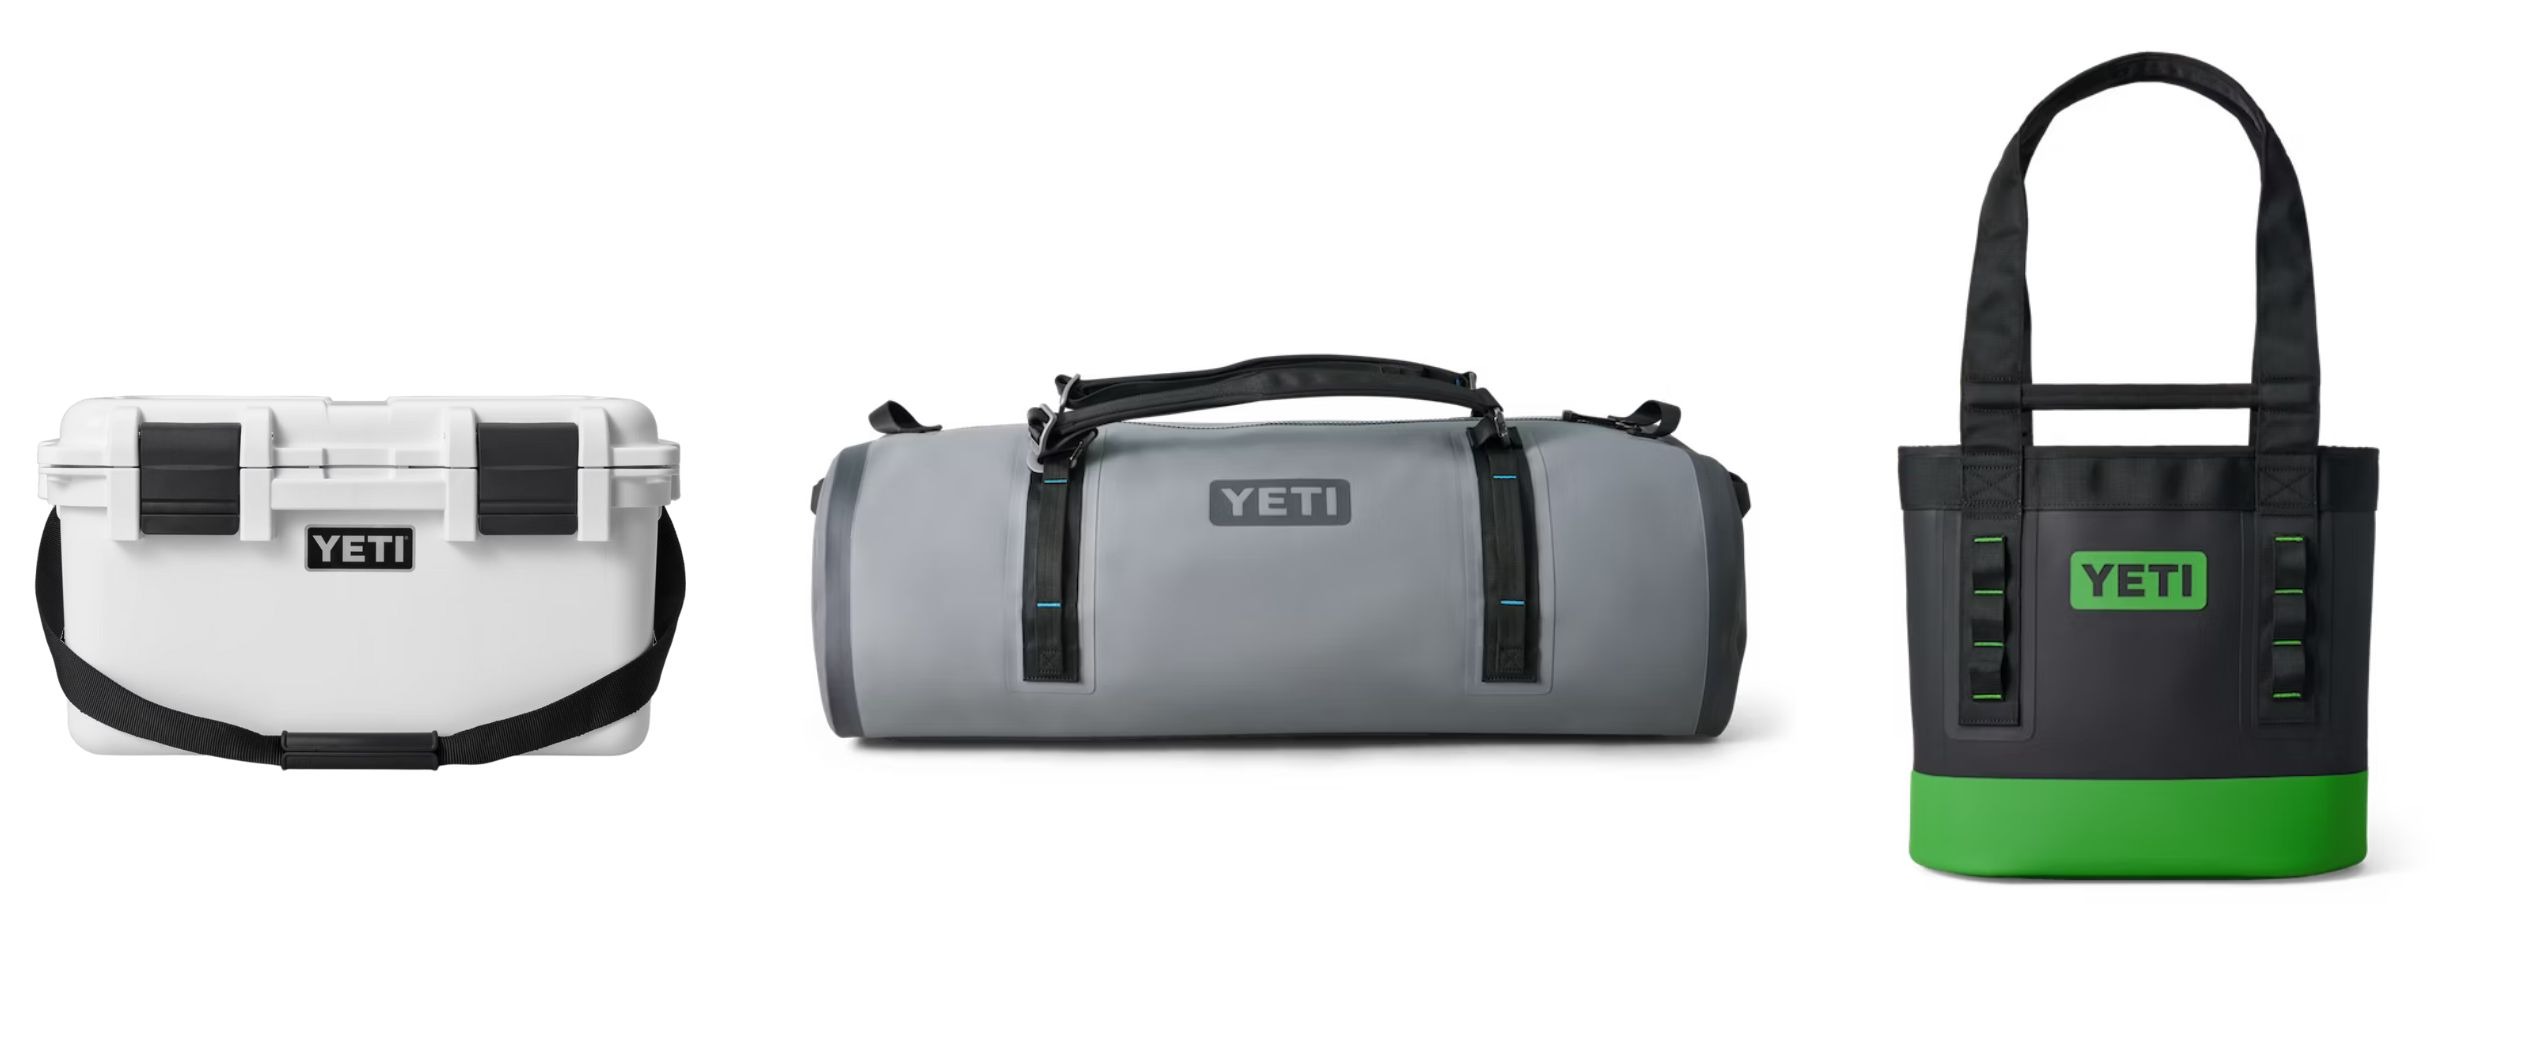 This YETI Duffle Is Perfect for Your Next River Trip